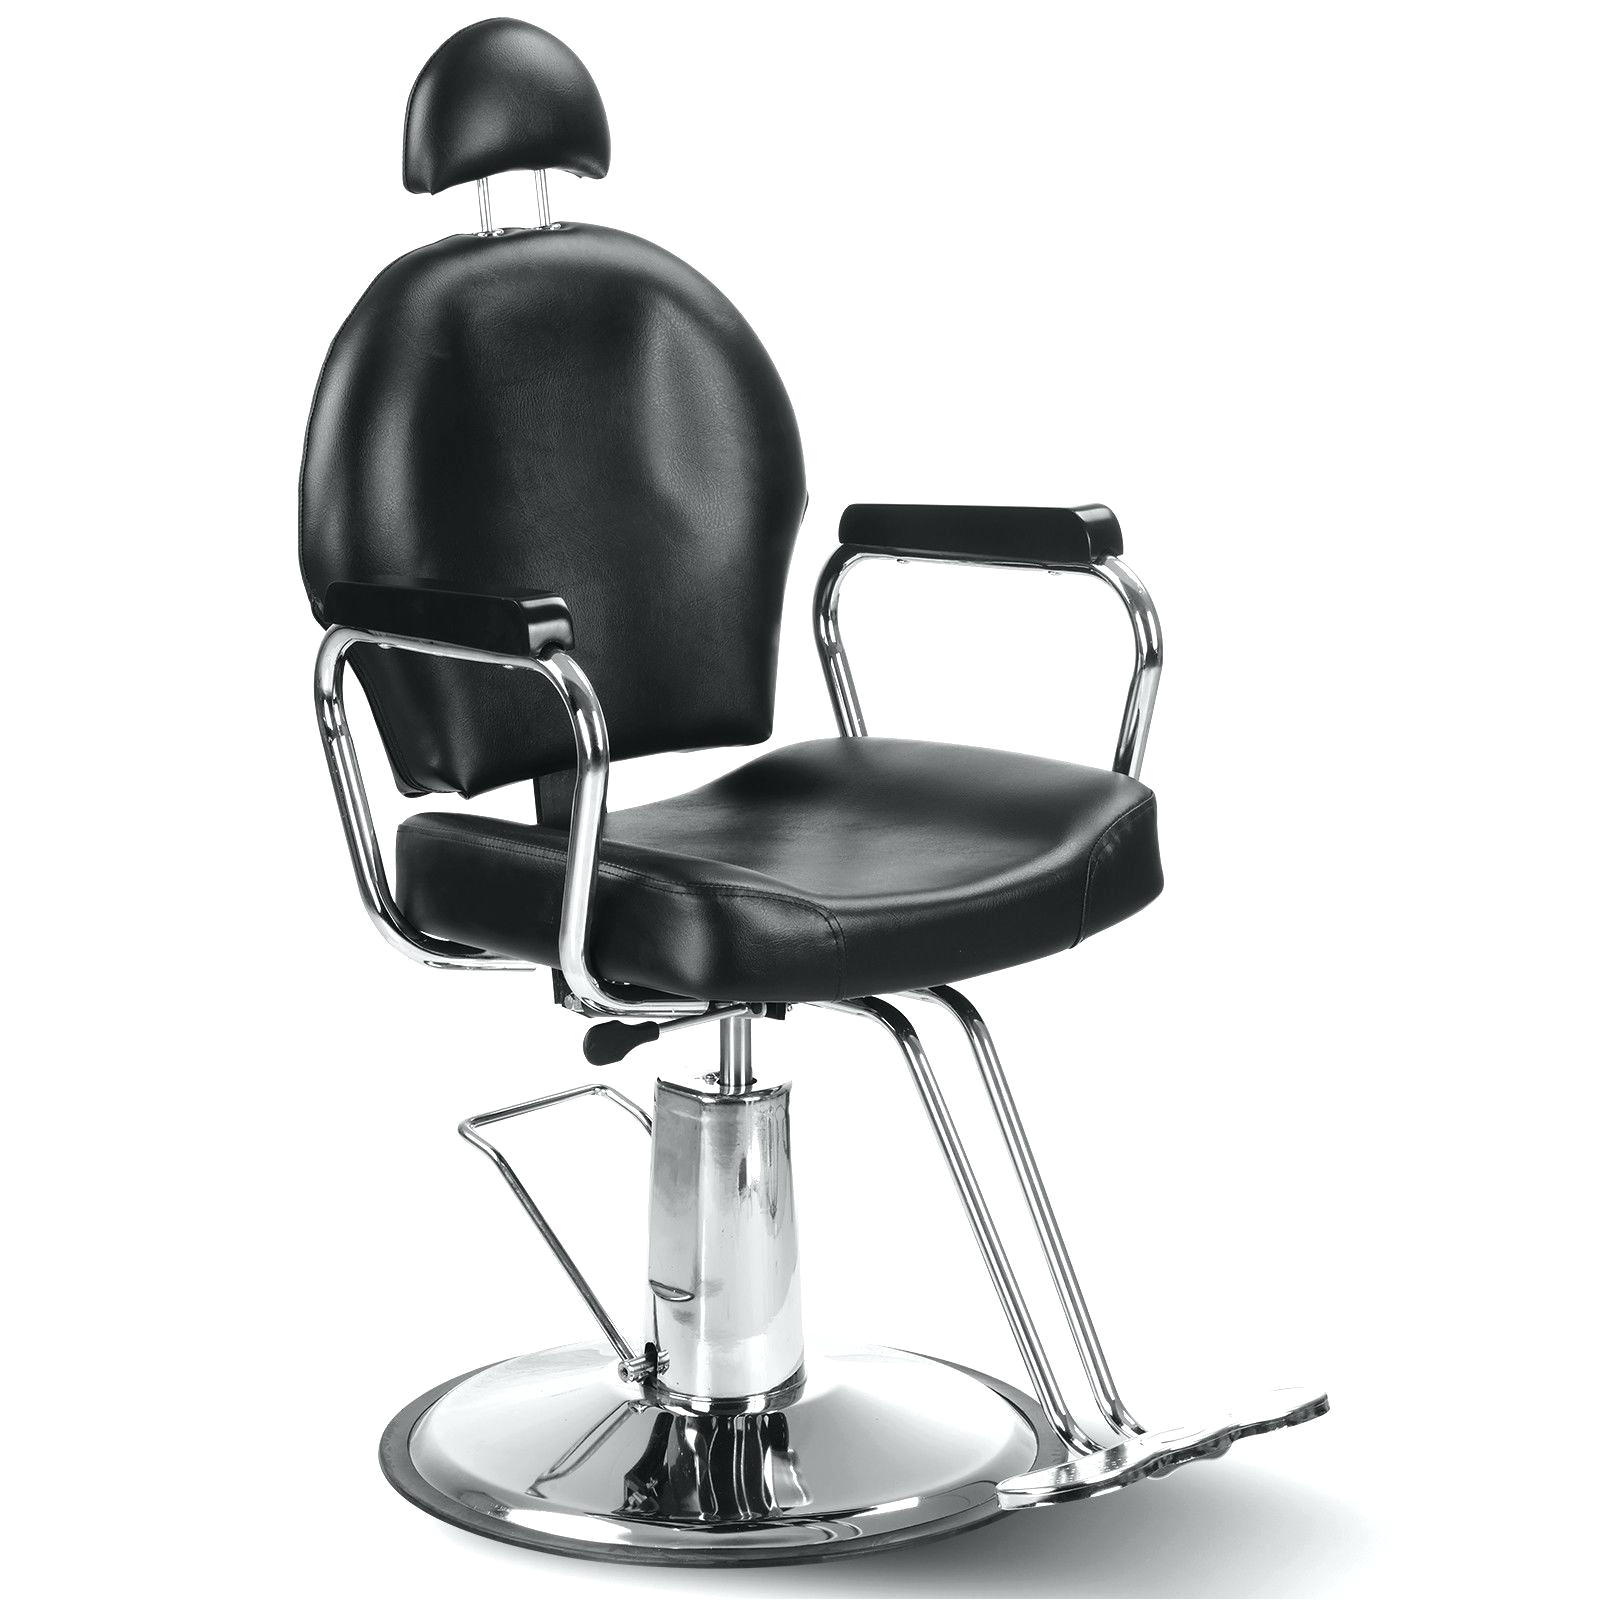 full size of chair hydraulic chairs fluid for salon repair cape town buy online white hairdressing